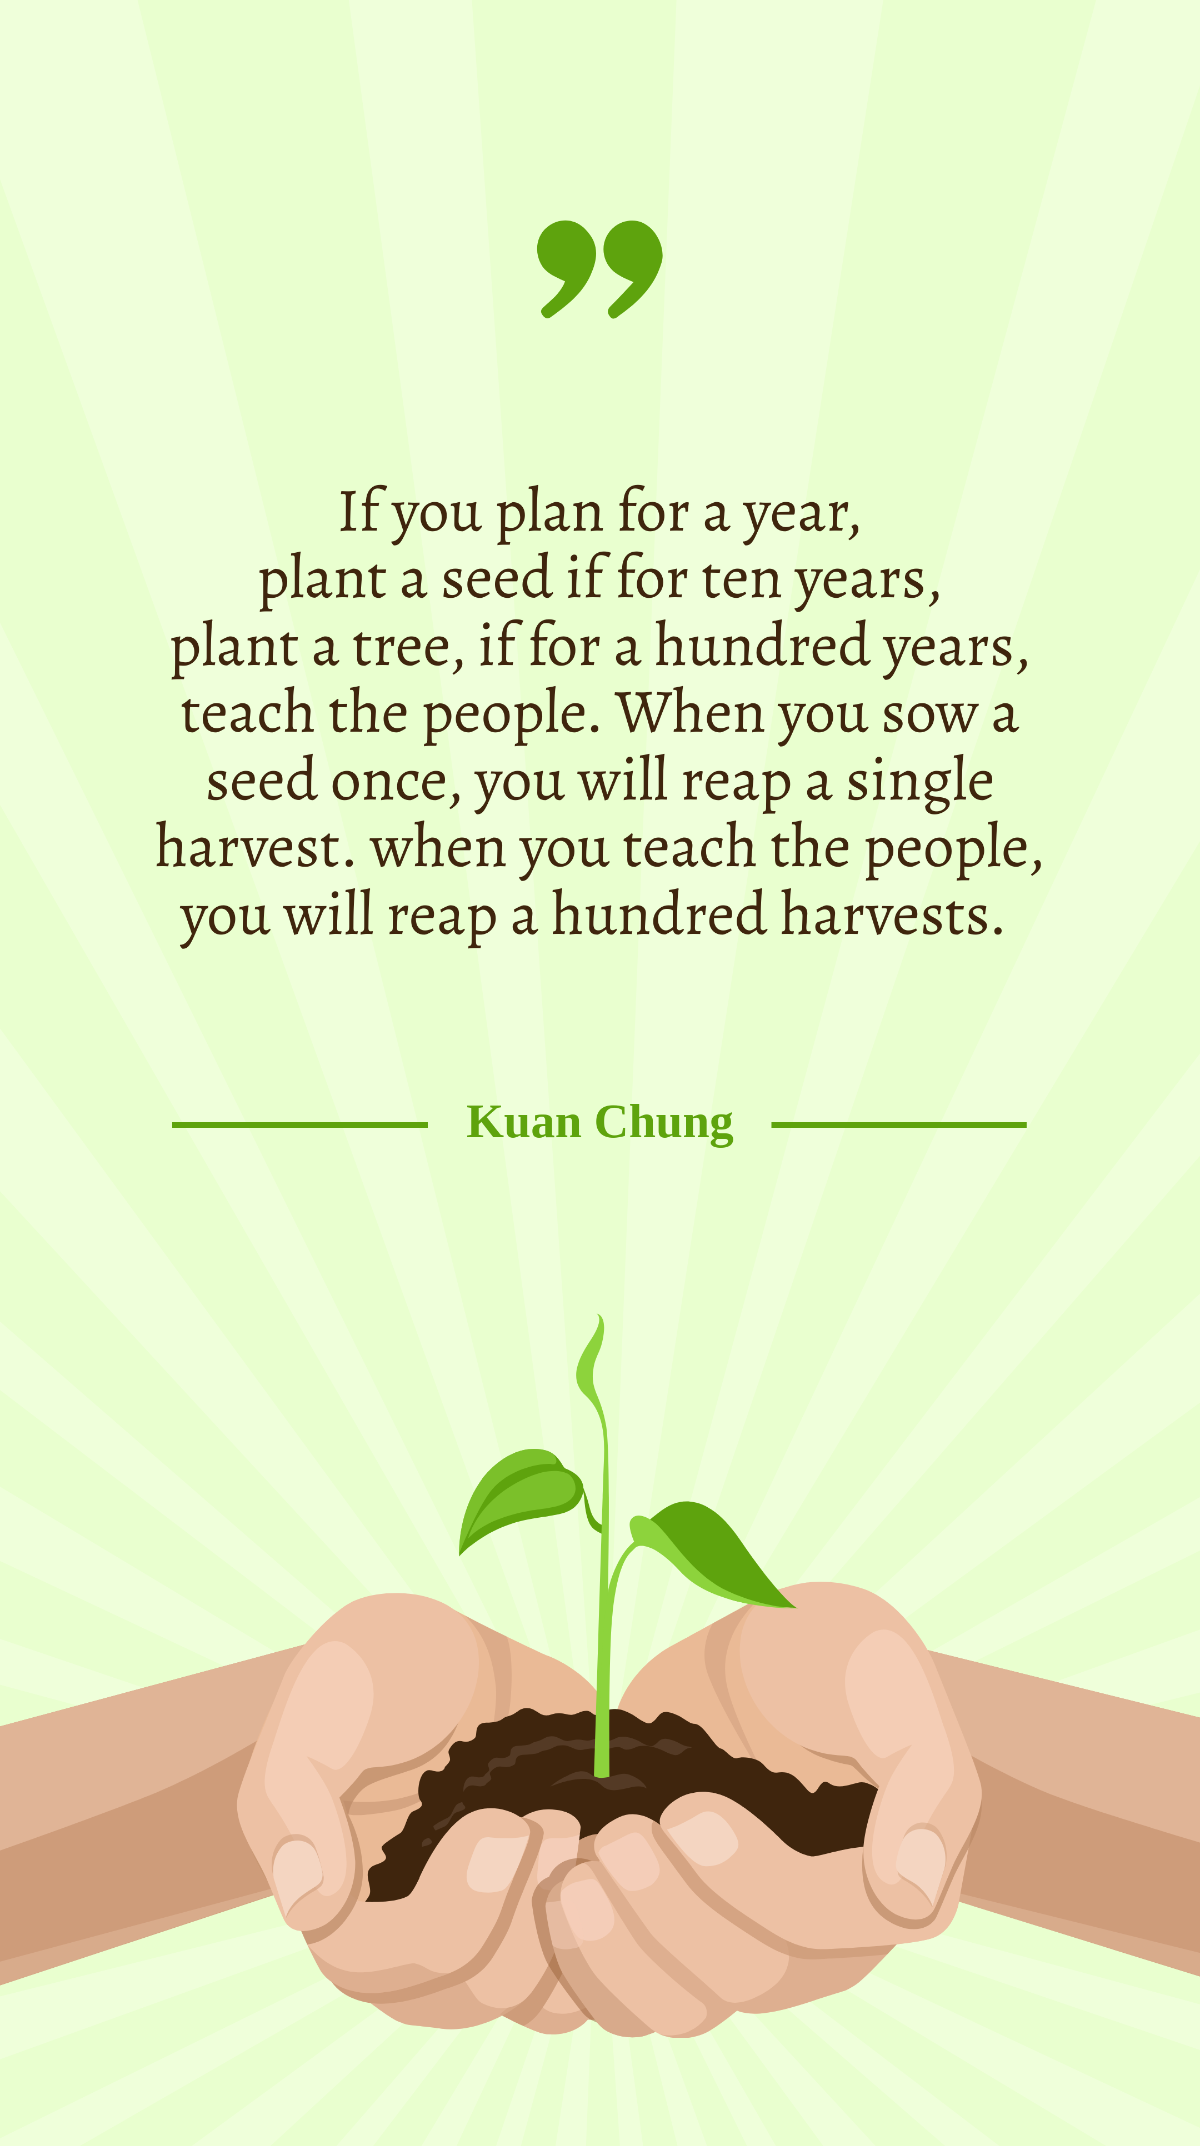 Free Kuan Chung - If you plan for a year, plant a seed if for ten years, plant a tree, if for a hundred years, teach the people. When you sow a seed once, you will reap a single harvest. when you teach the